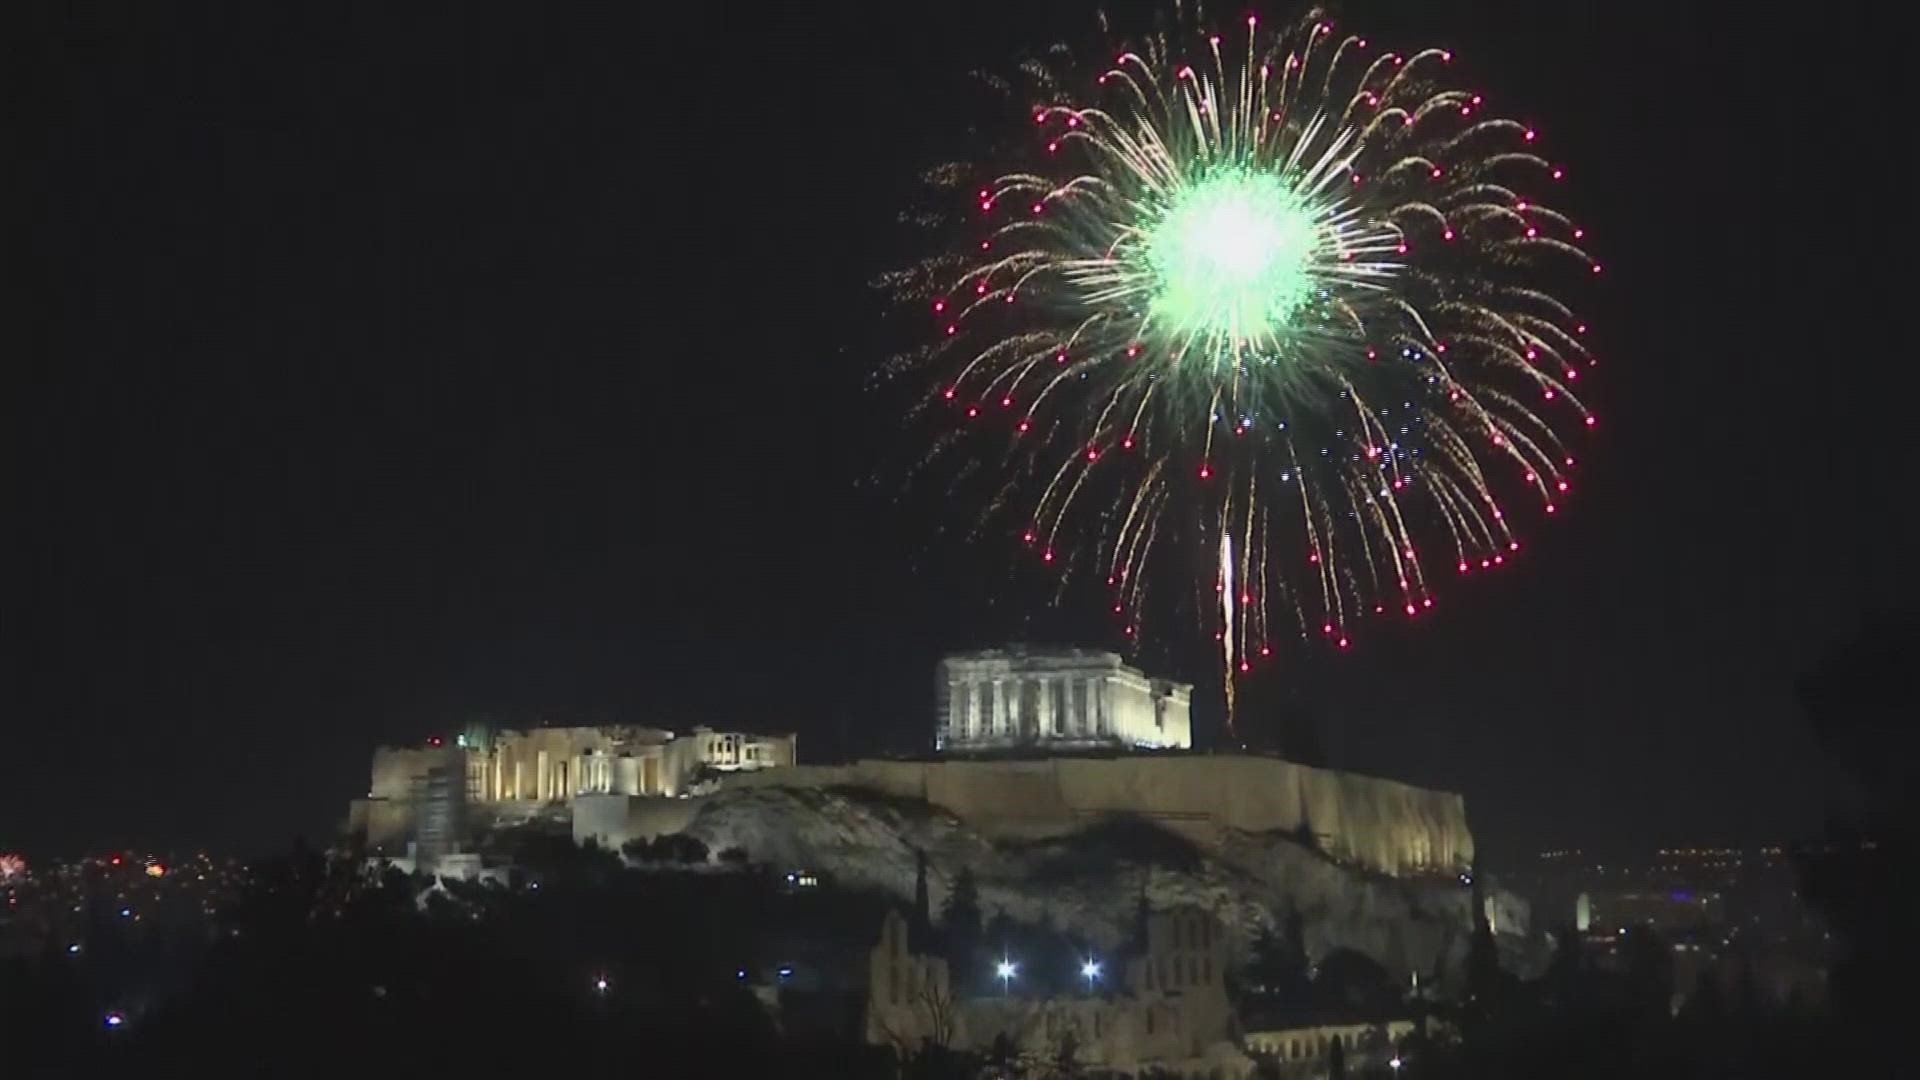 Fireworks and celebrations rang out around Athens on Saturday morning as the Greek capital celebrated the start of the new year.